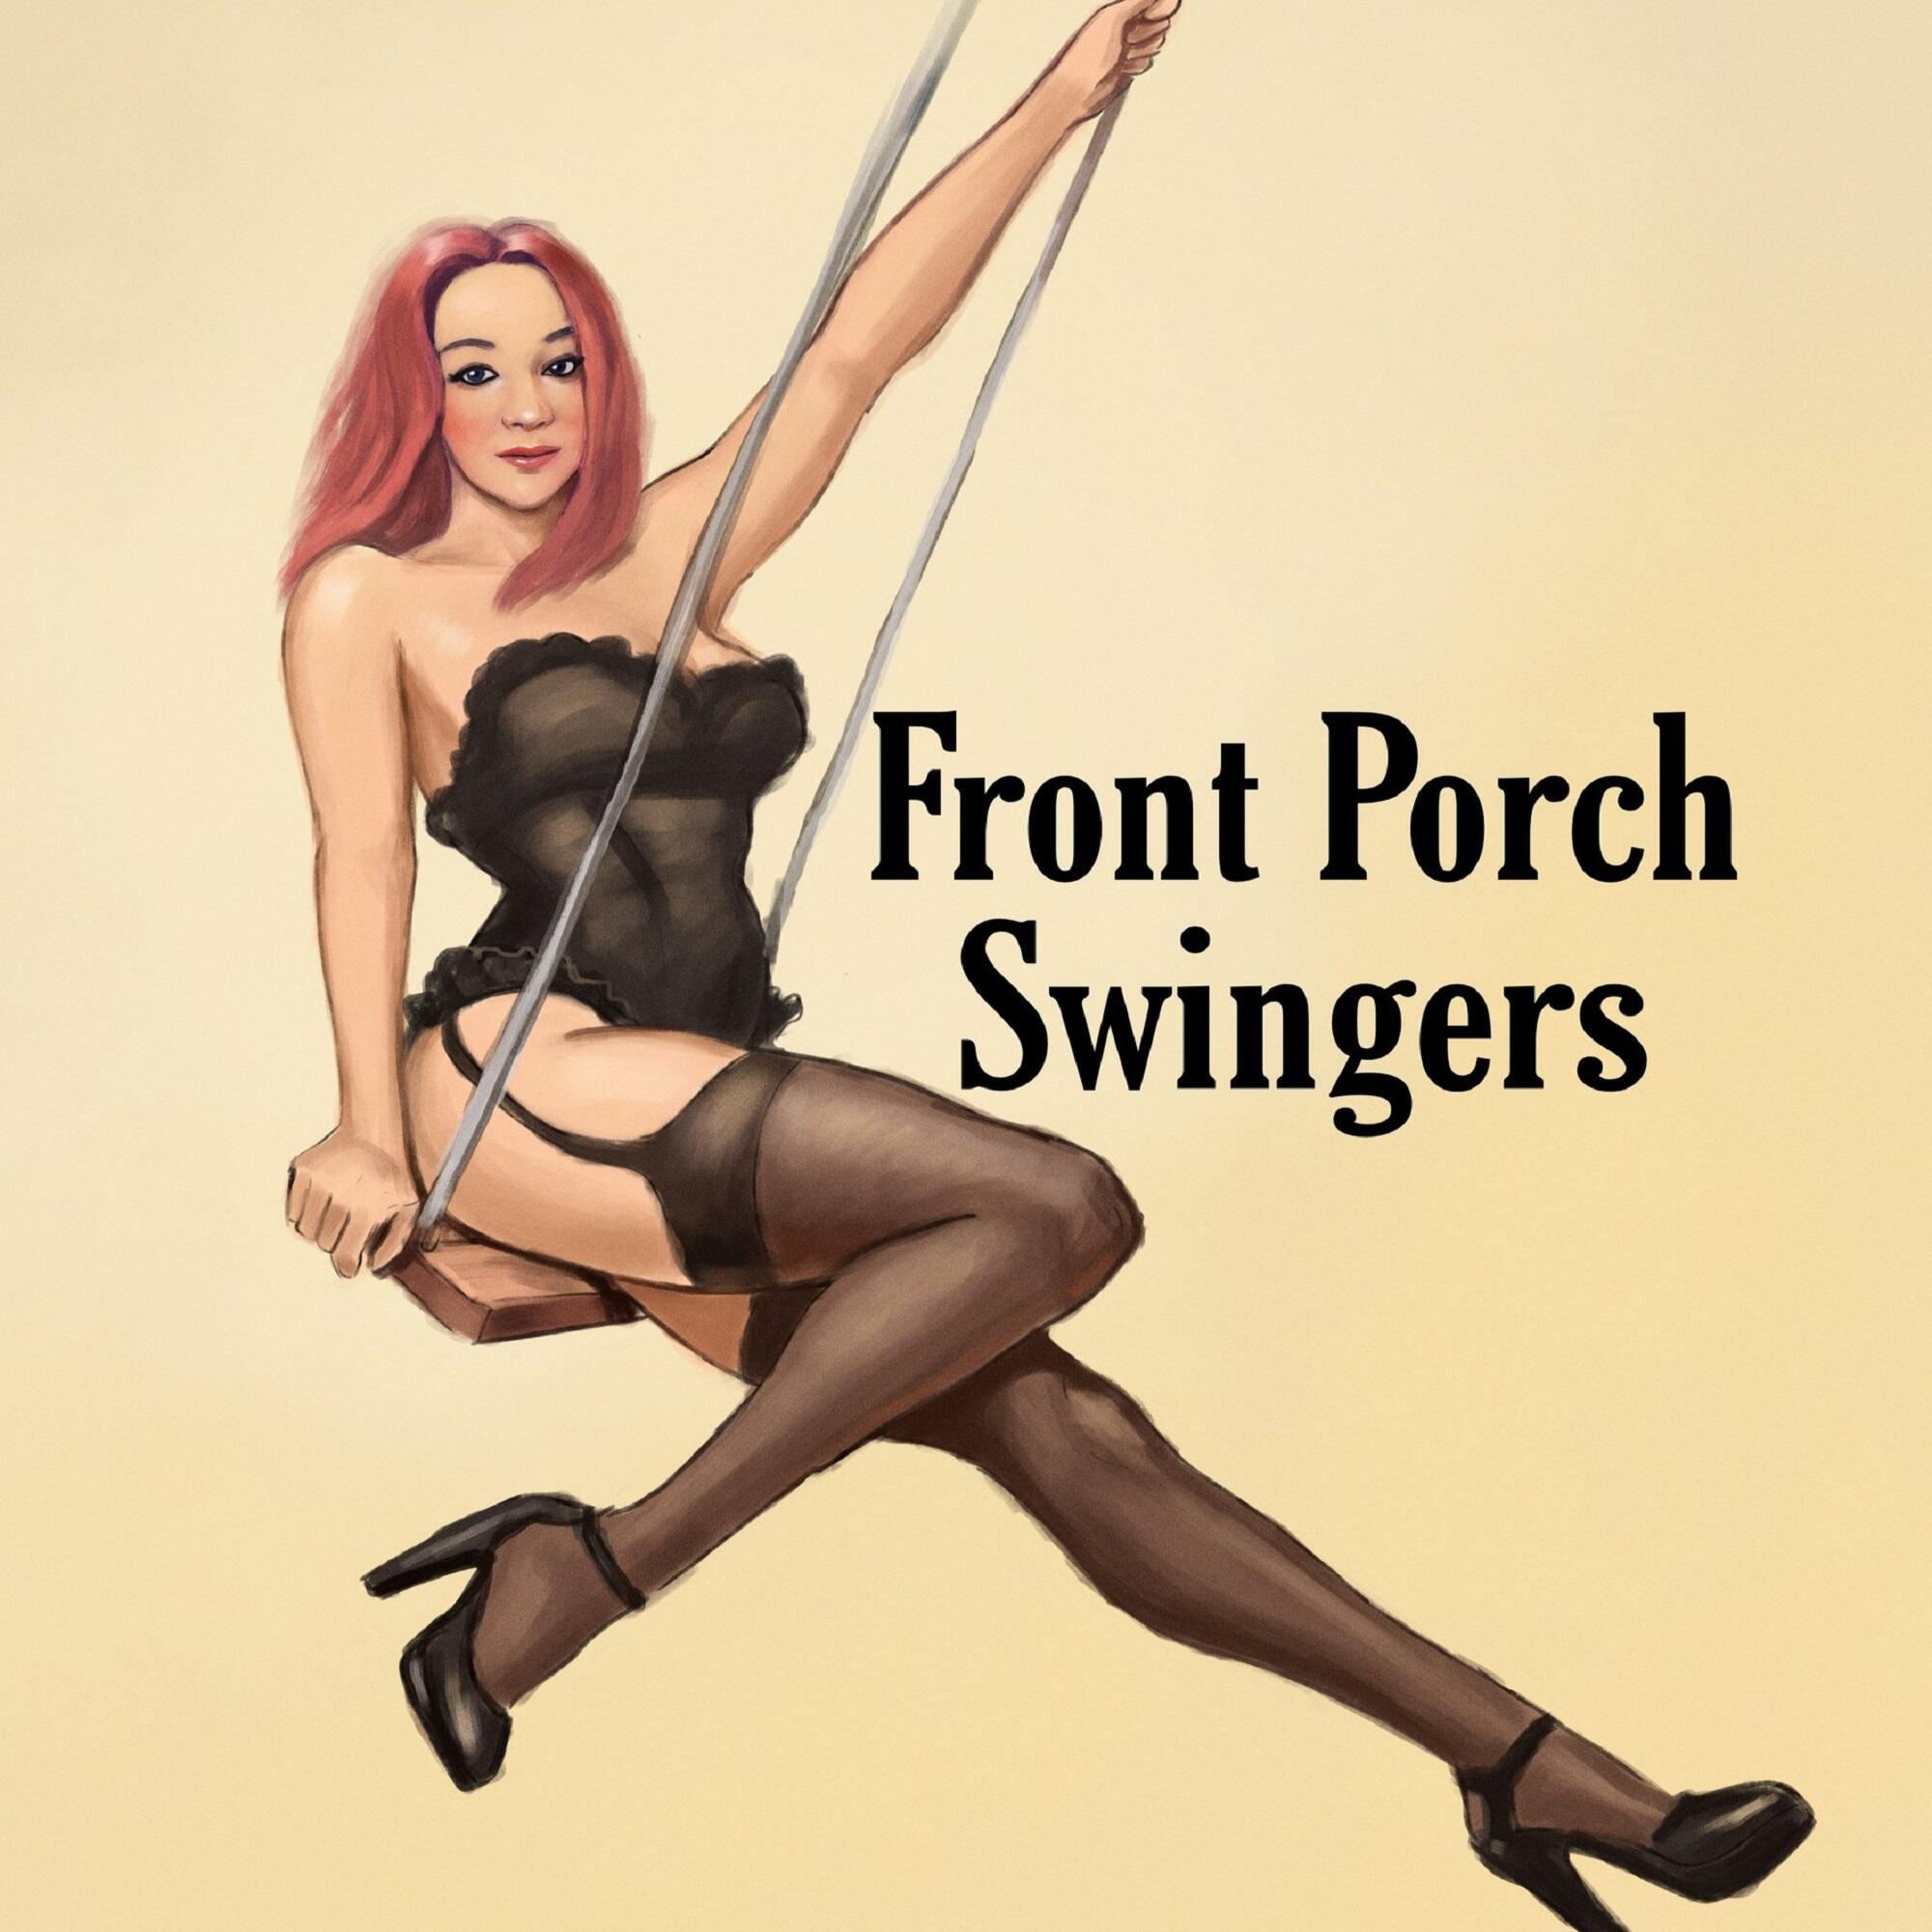 ♫ Front Porch Swingers Whats it REALLY like to be in an open relationship? Find out as we re-tell our real-life adventures as swingers! From Brennas hotwife encounters to Brians solo image